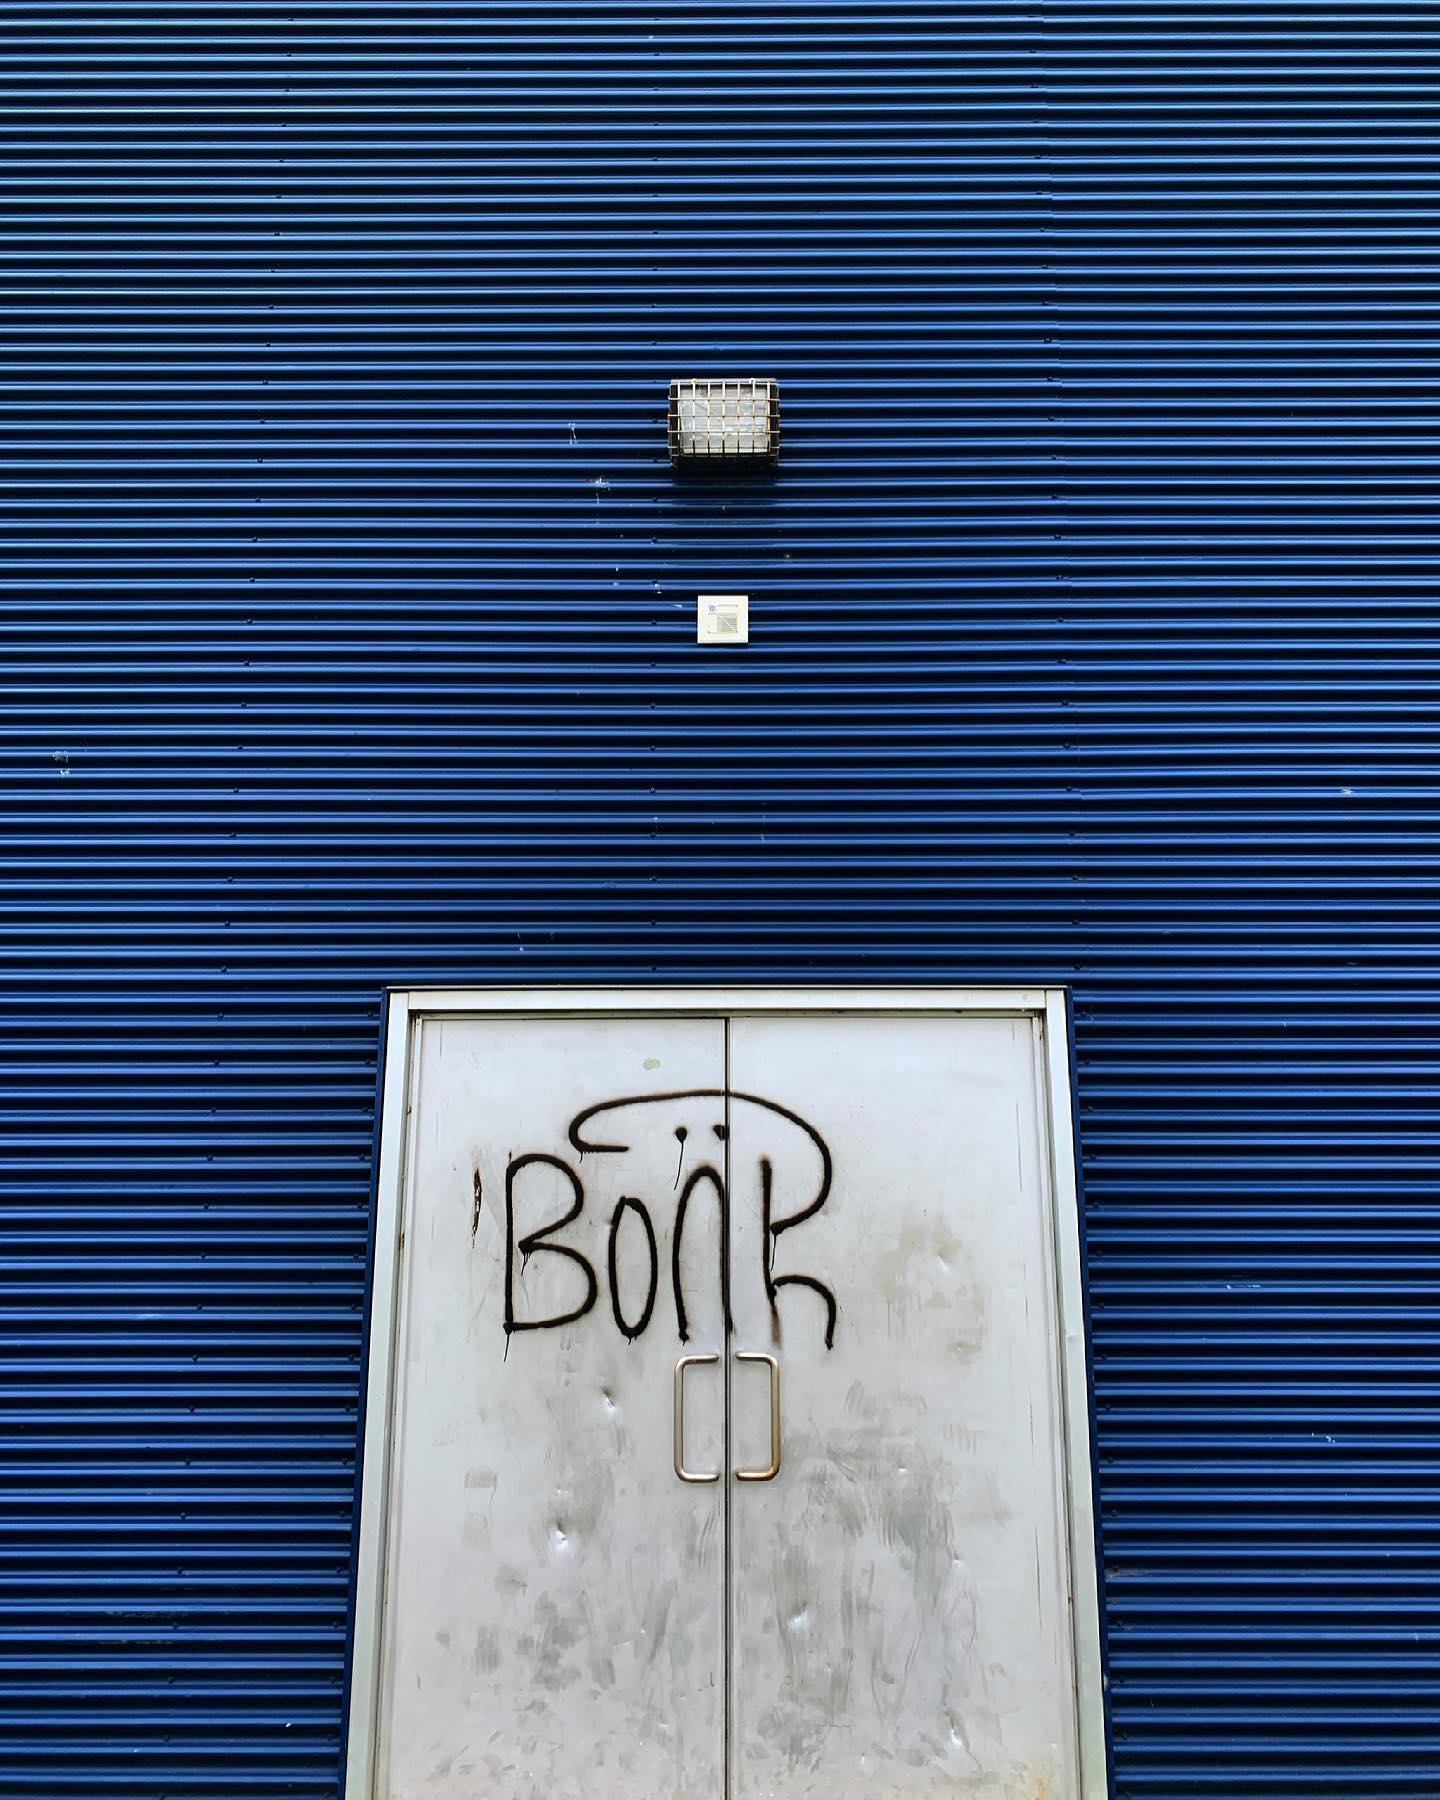 If you go for a ride today …#photography #bonk #dontbonk #tag #esquimalt